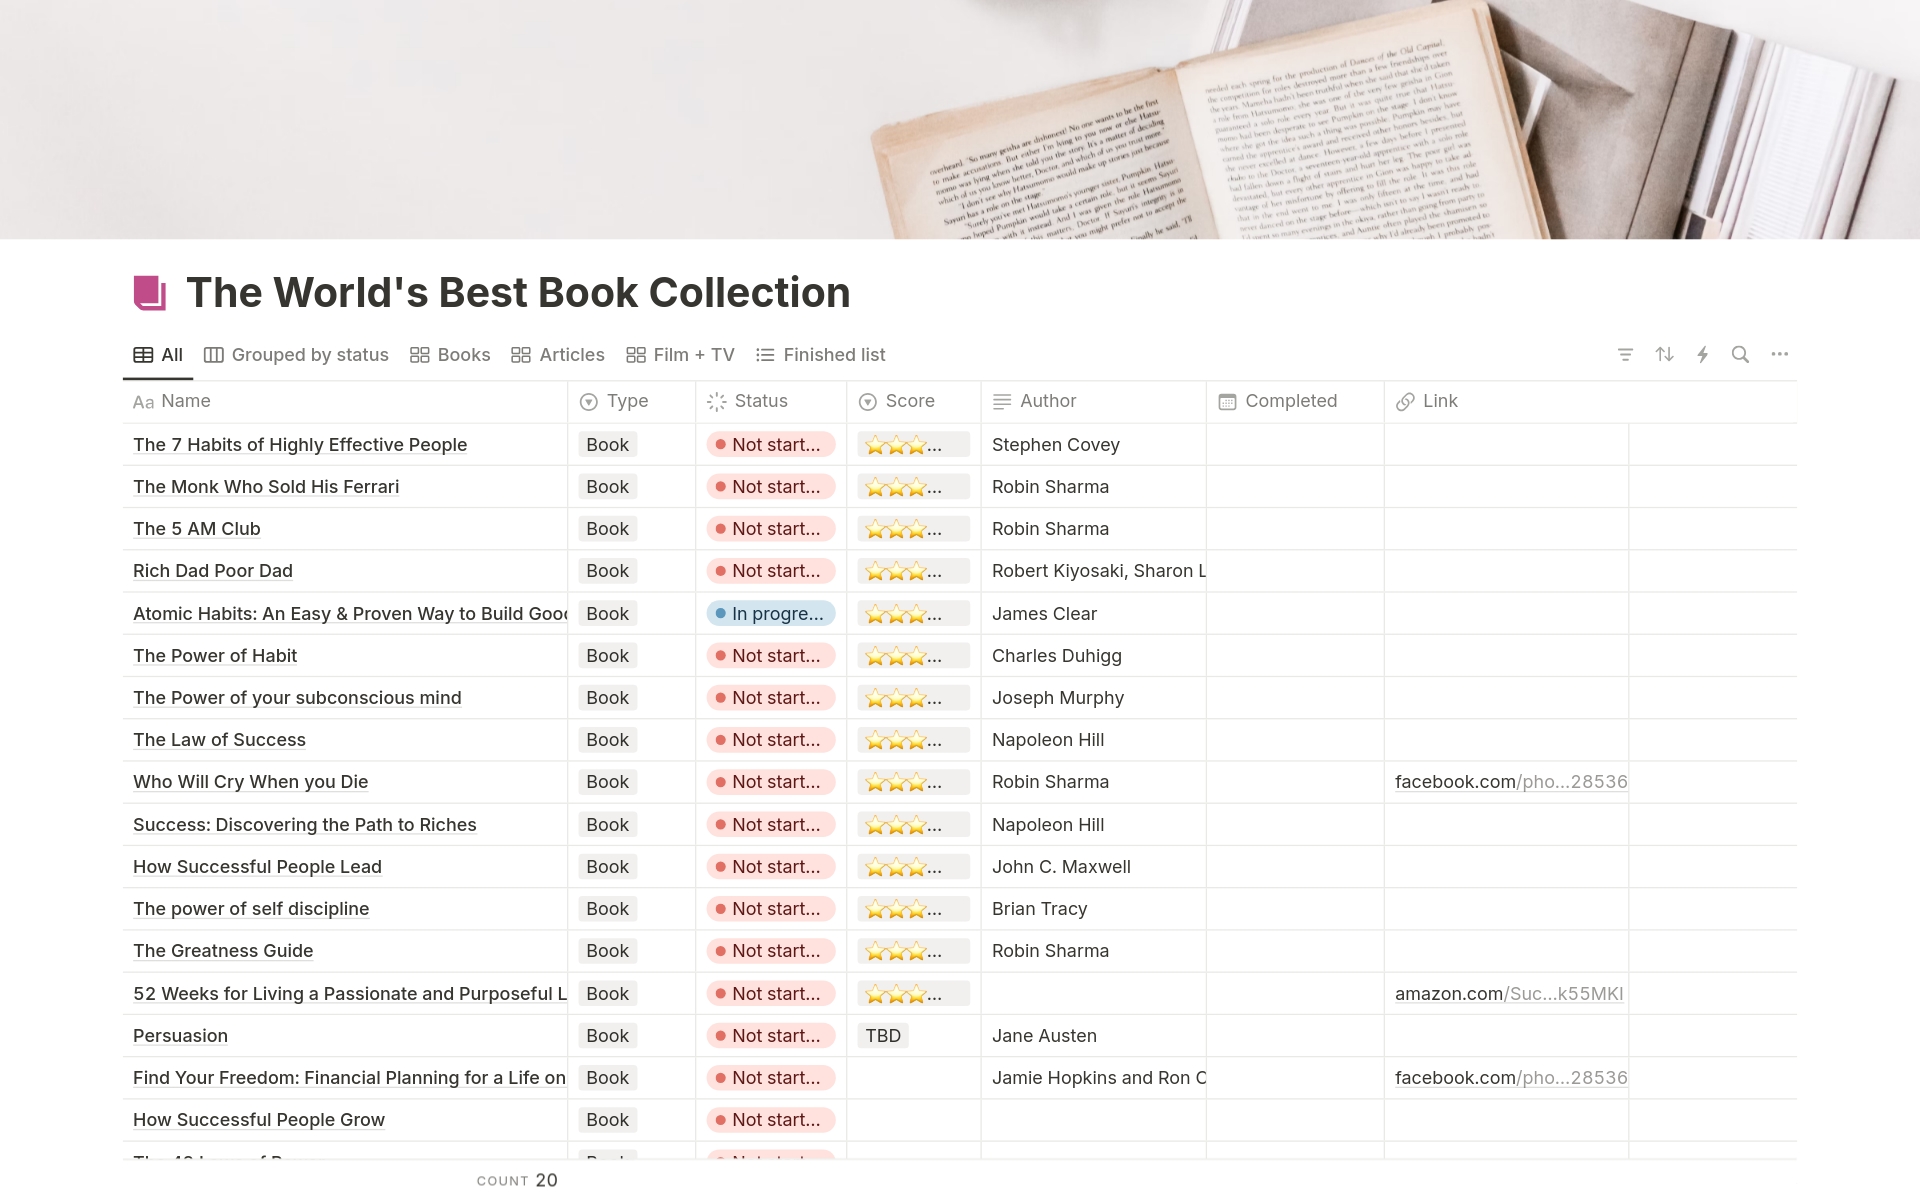  The World's Best Book Collectionのテンプレートのプレビュー